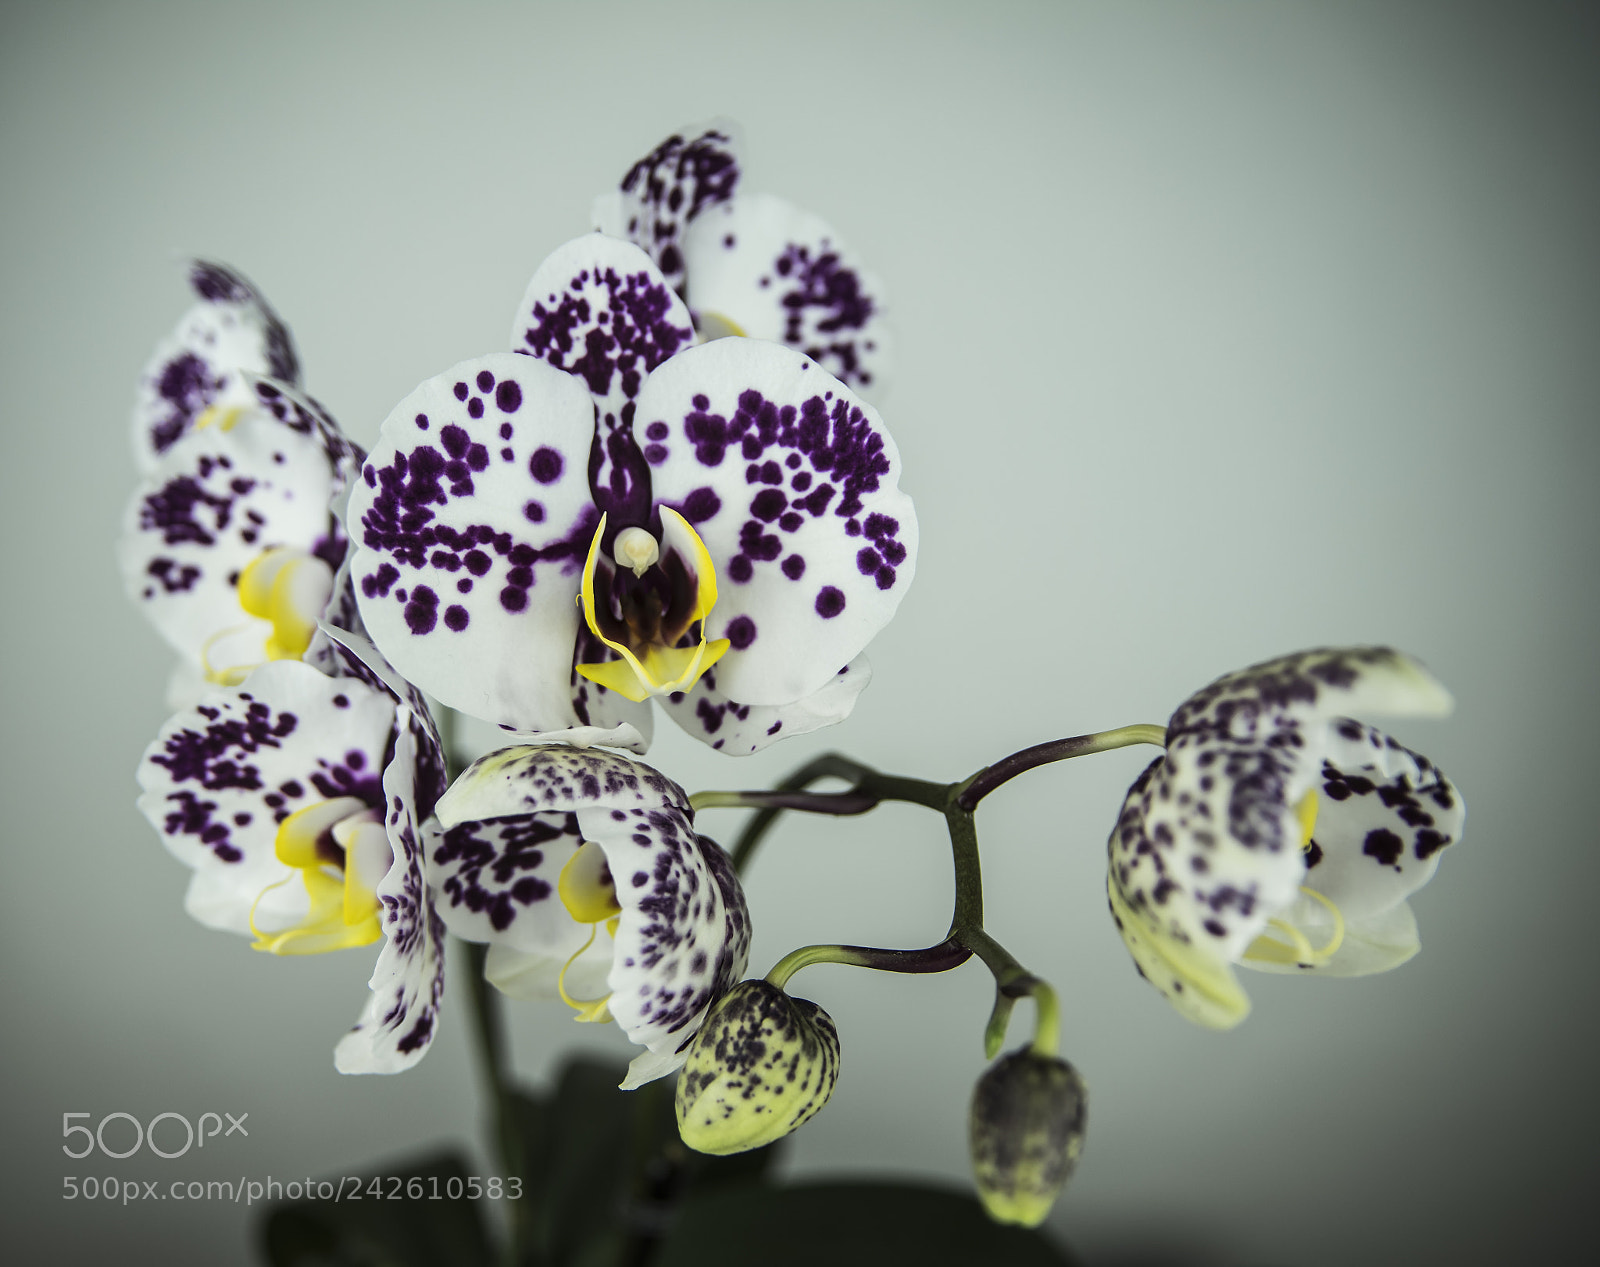 Pentax K-70 sample photo. Orchid photography